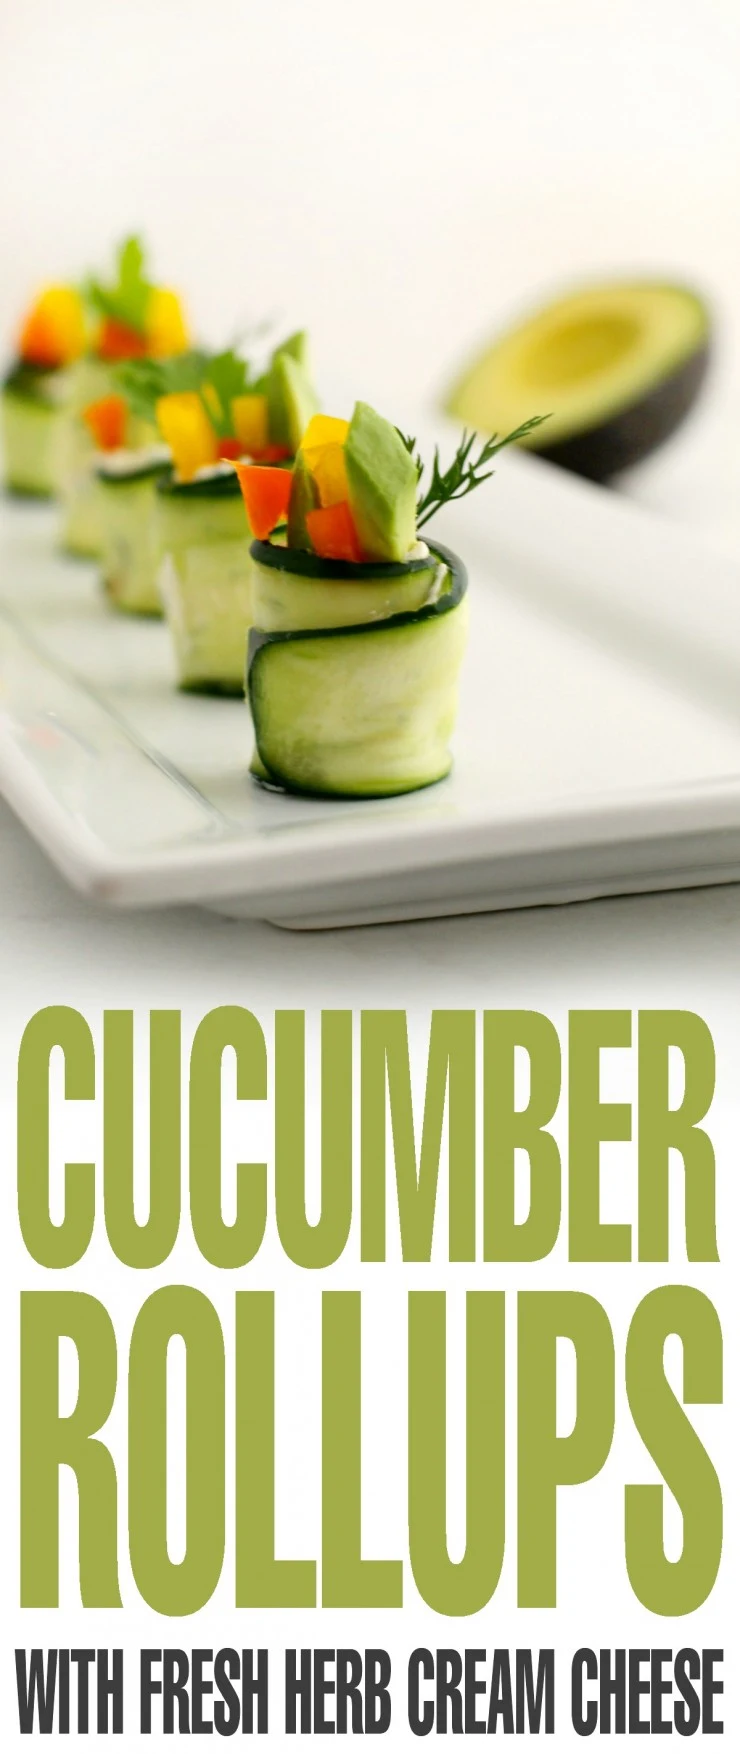 These Cucumber Rollups with Fresh Herb Cream Cheese make for a nice substitution to the typical veggie tray at bbq’s and parties. It’s also a great way to get the kiddos to eat more veggies since these little crunchy rolls are so fun to eat!